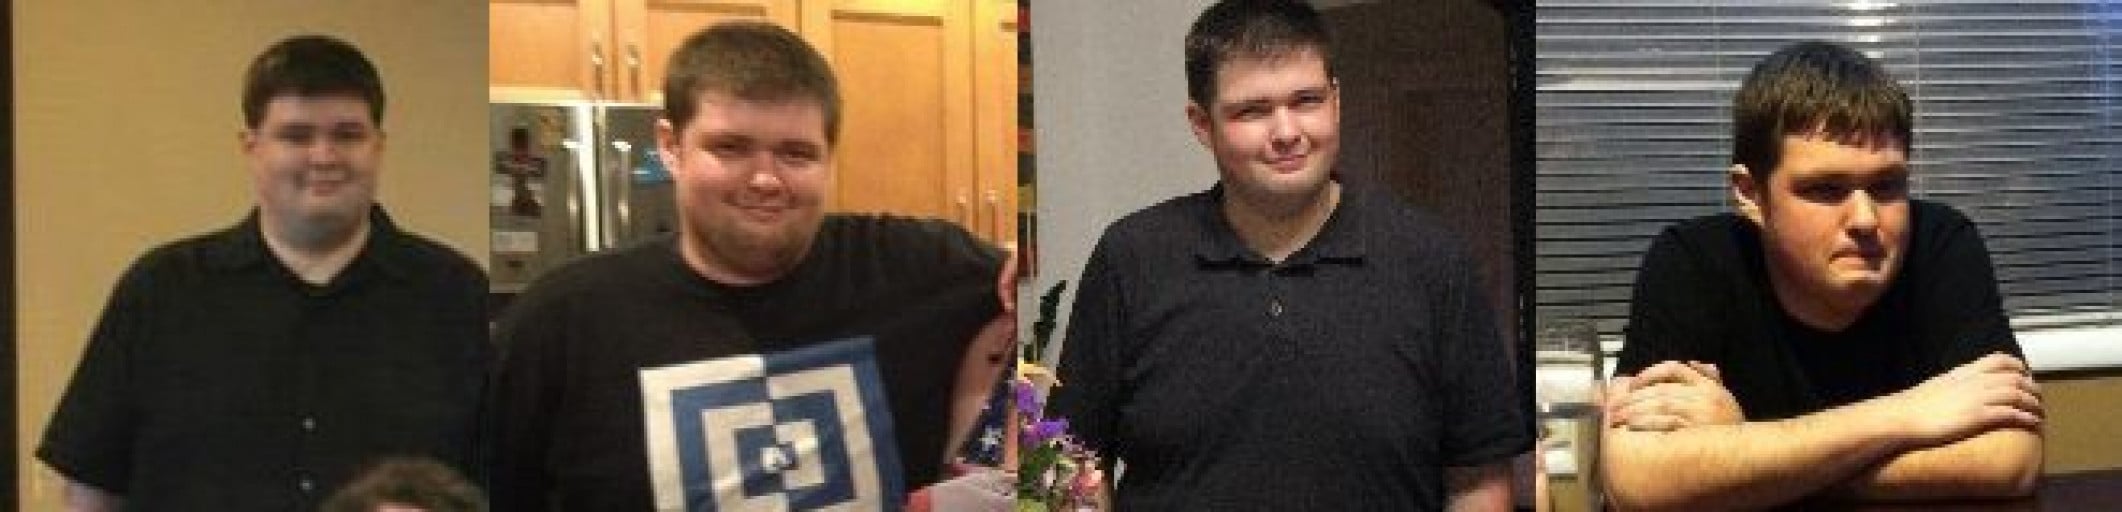 A before and after photo of a 6'0" male showing a weight reduction from 350 pounds to 240 pounds. A respectable loss of 110 pounds.